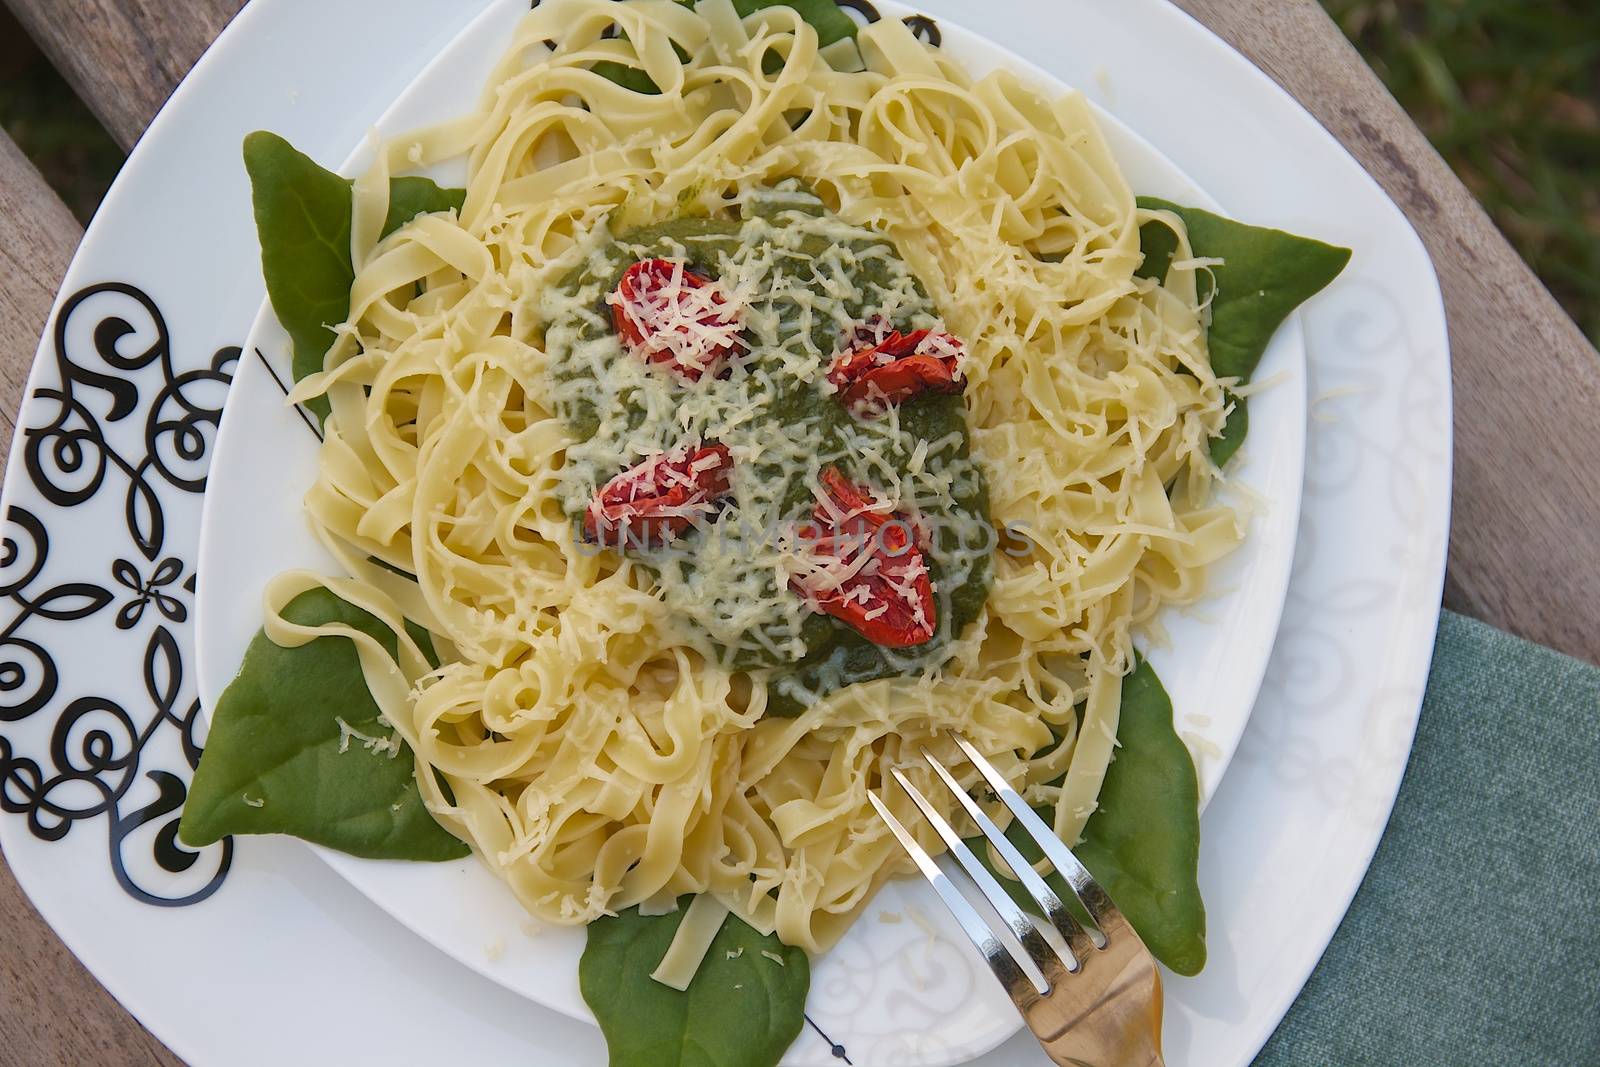 Italian pasta - tagliatelle with spinach, tomatoes and cheese. Fork and green napkin in the background